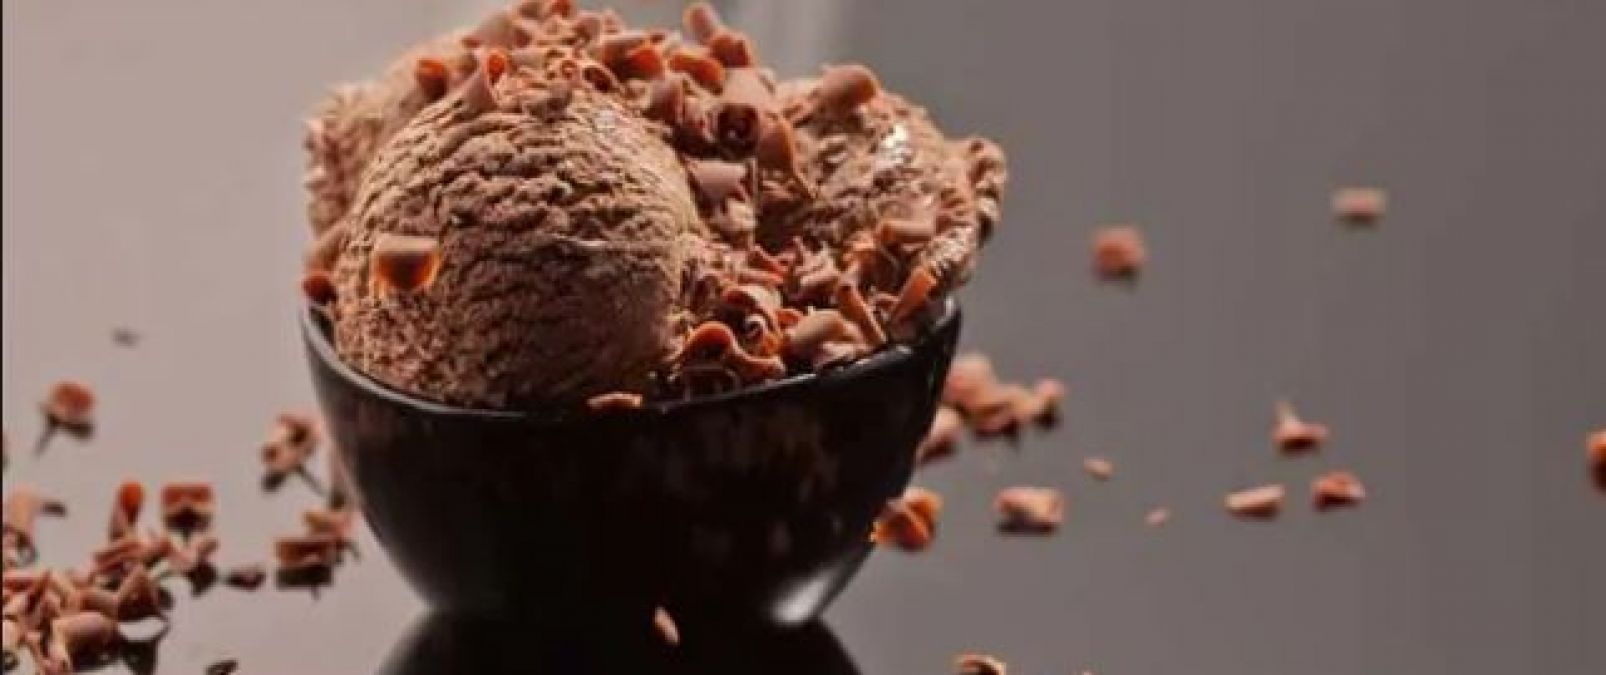 Make Special chocolate ice cream for family members in summer